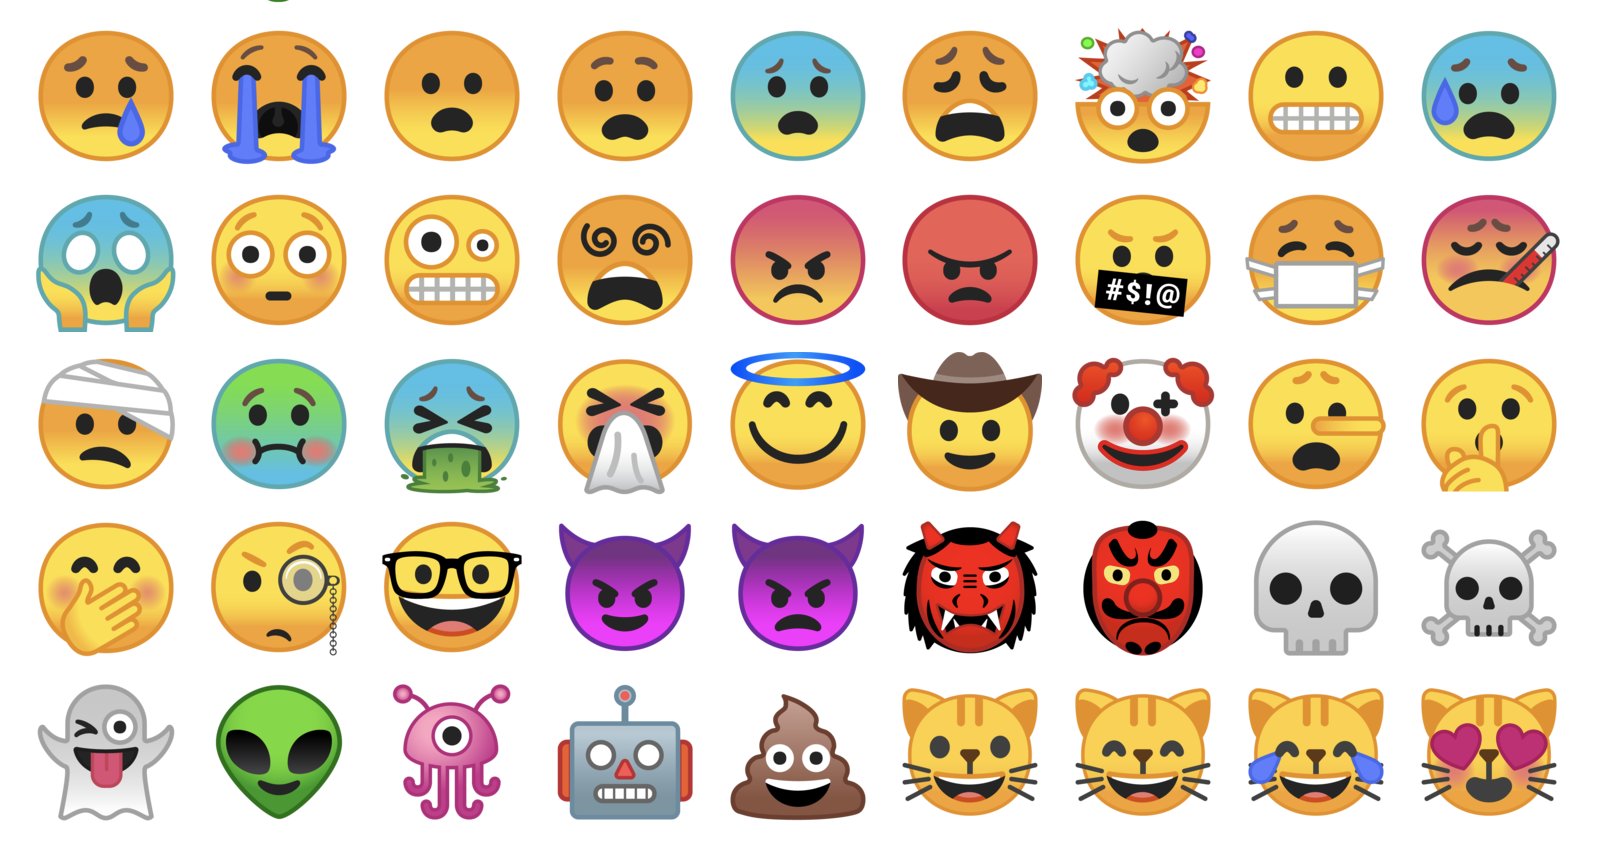 Twitter Emojis List Of Twitter Emojis For Use As Facebook Stickers | My ...